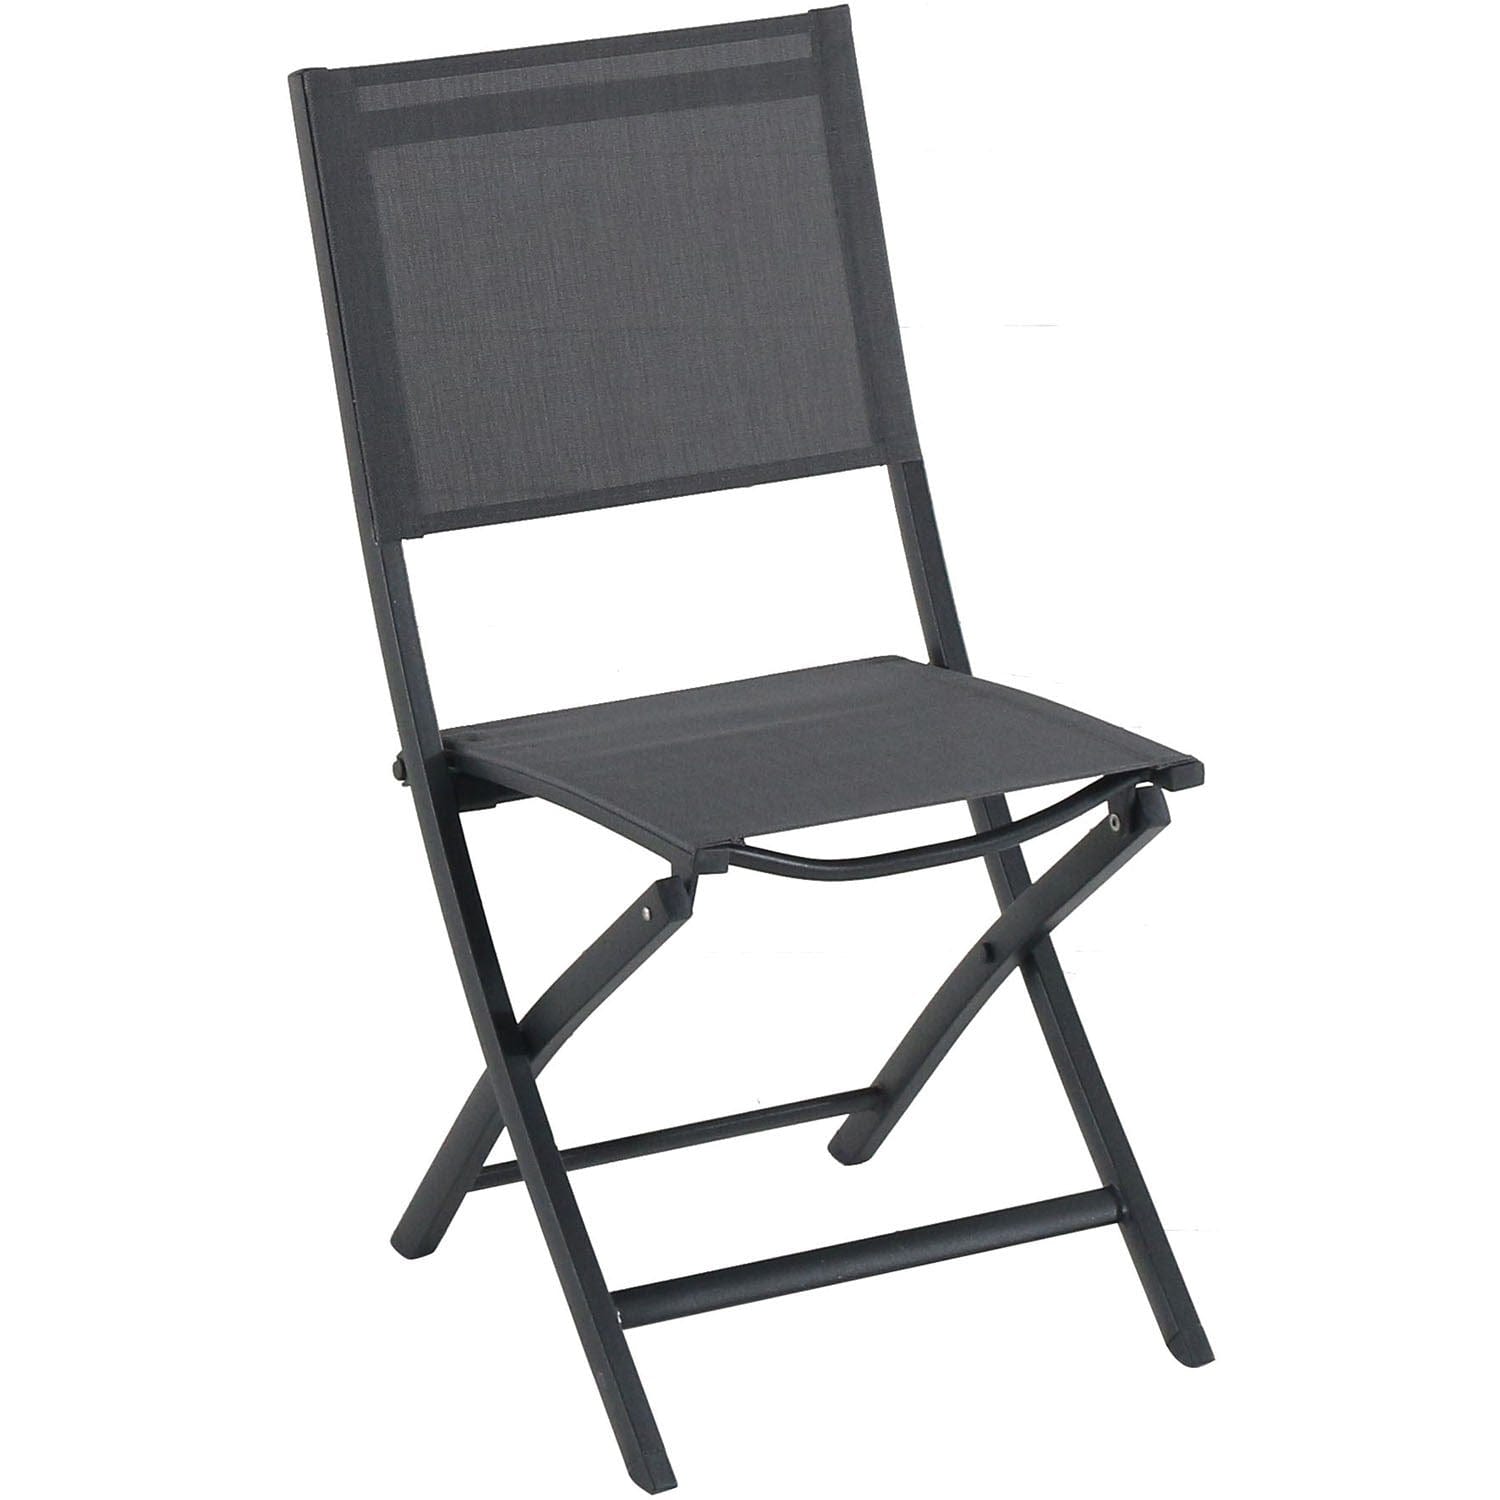 Hanover Outdoor Dining Set Hanover Del Mar 7 Piece Outdoor Dining Set with 6 Folding Sling Chairs in Gray and a White 40" x 118" Expandable Dining Table | DELDN7PCFD-WG